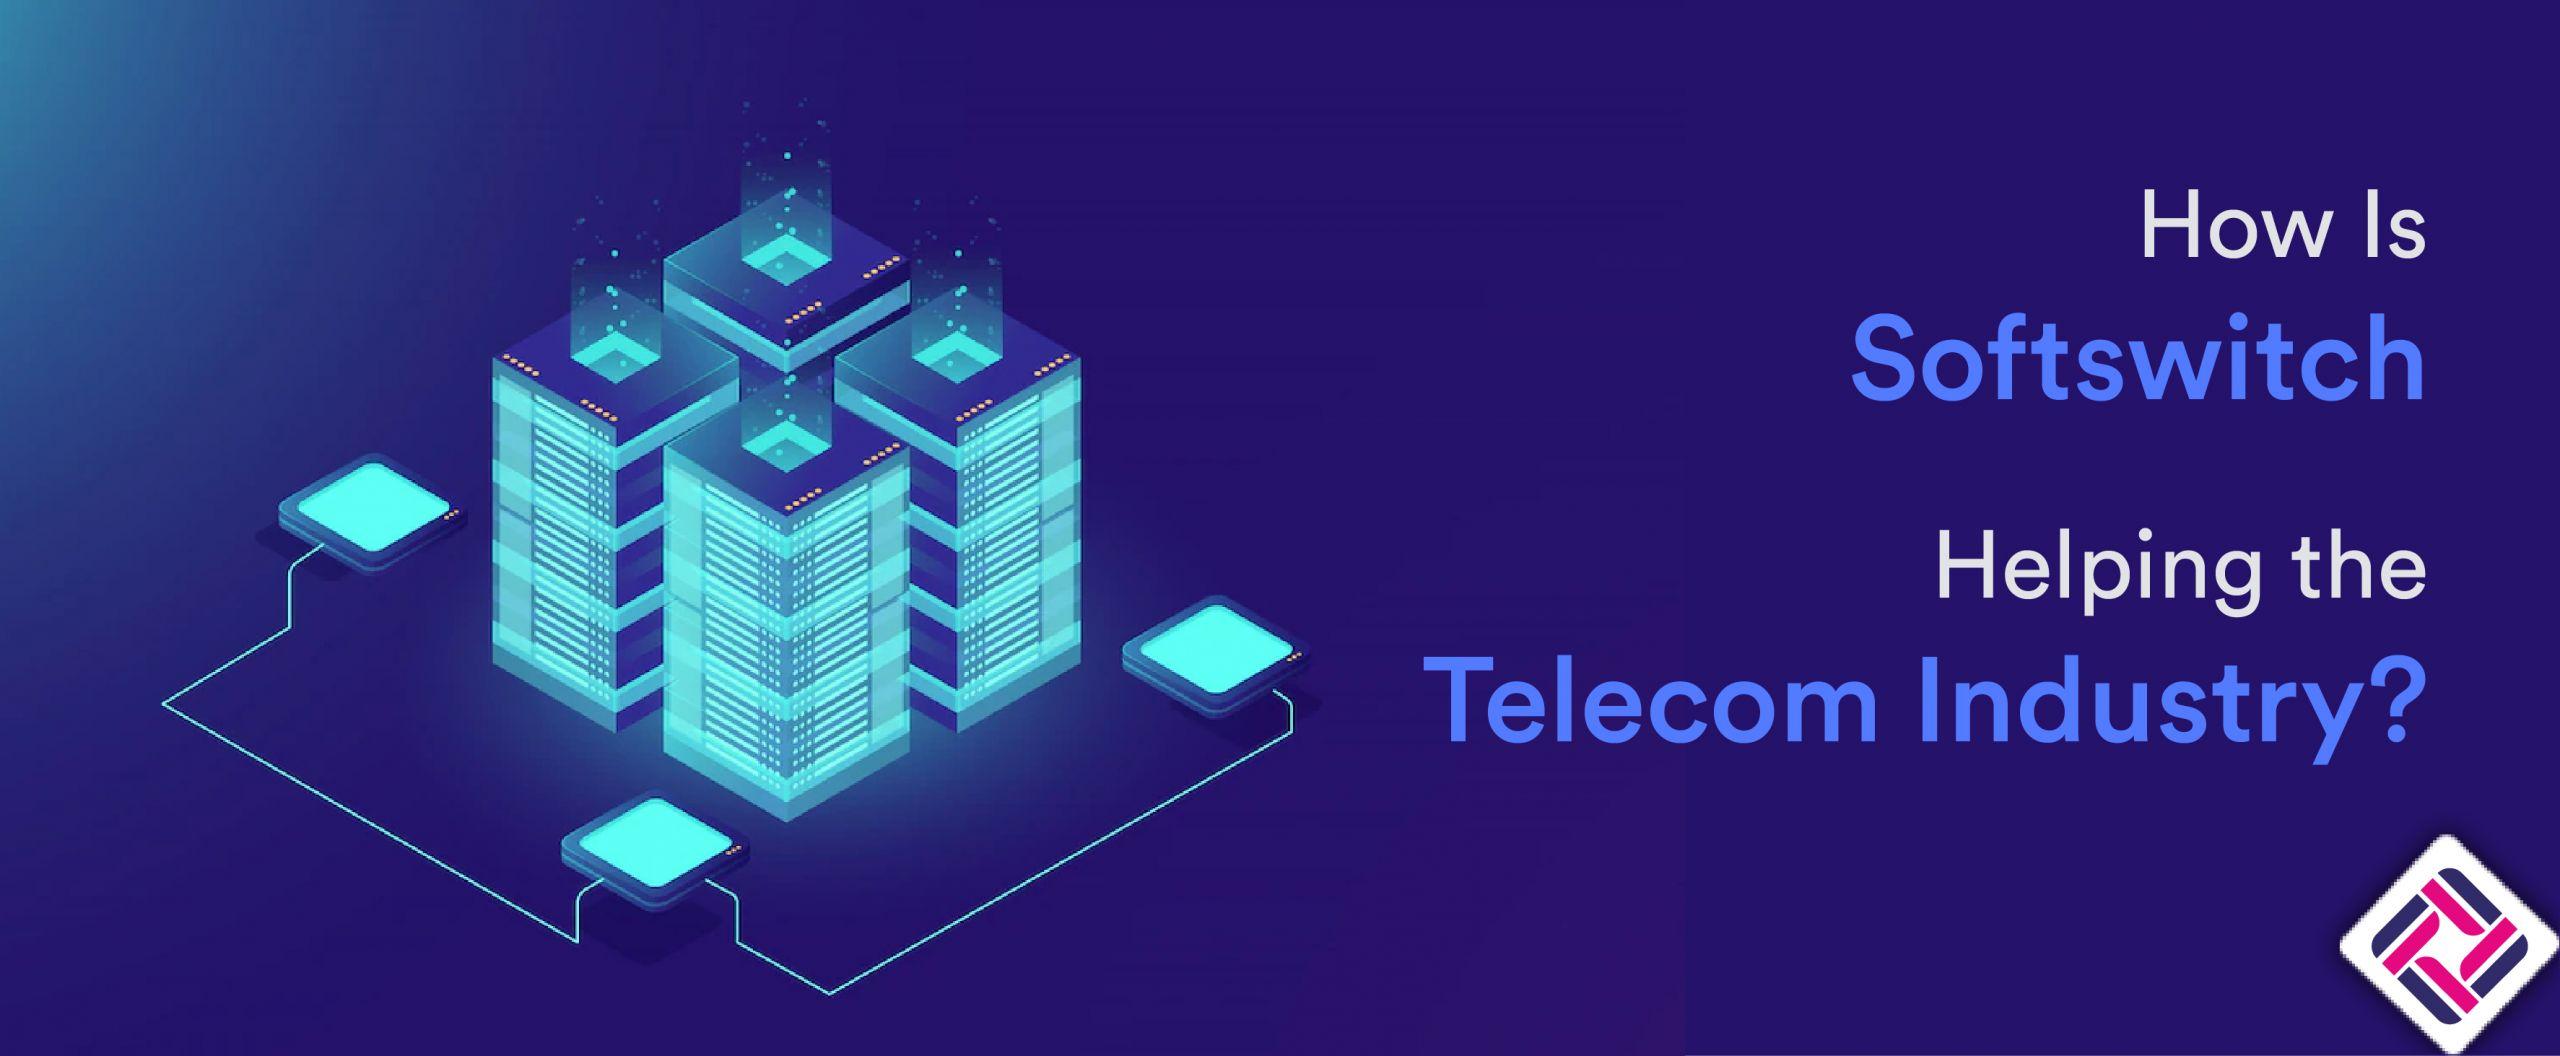 How Is Softswitch Helping the Telecom Industry?